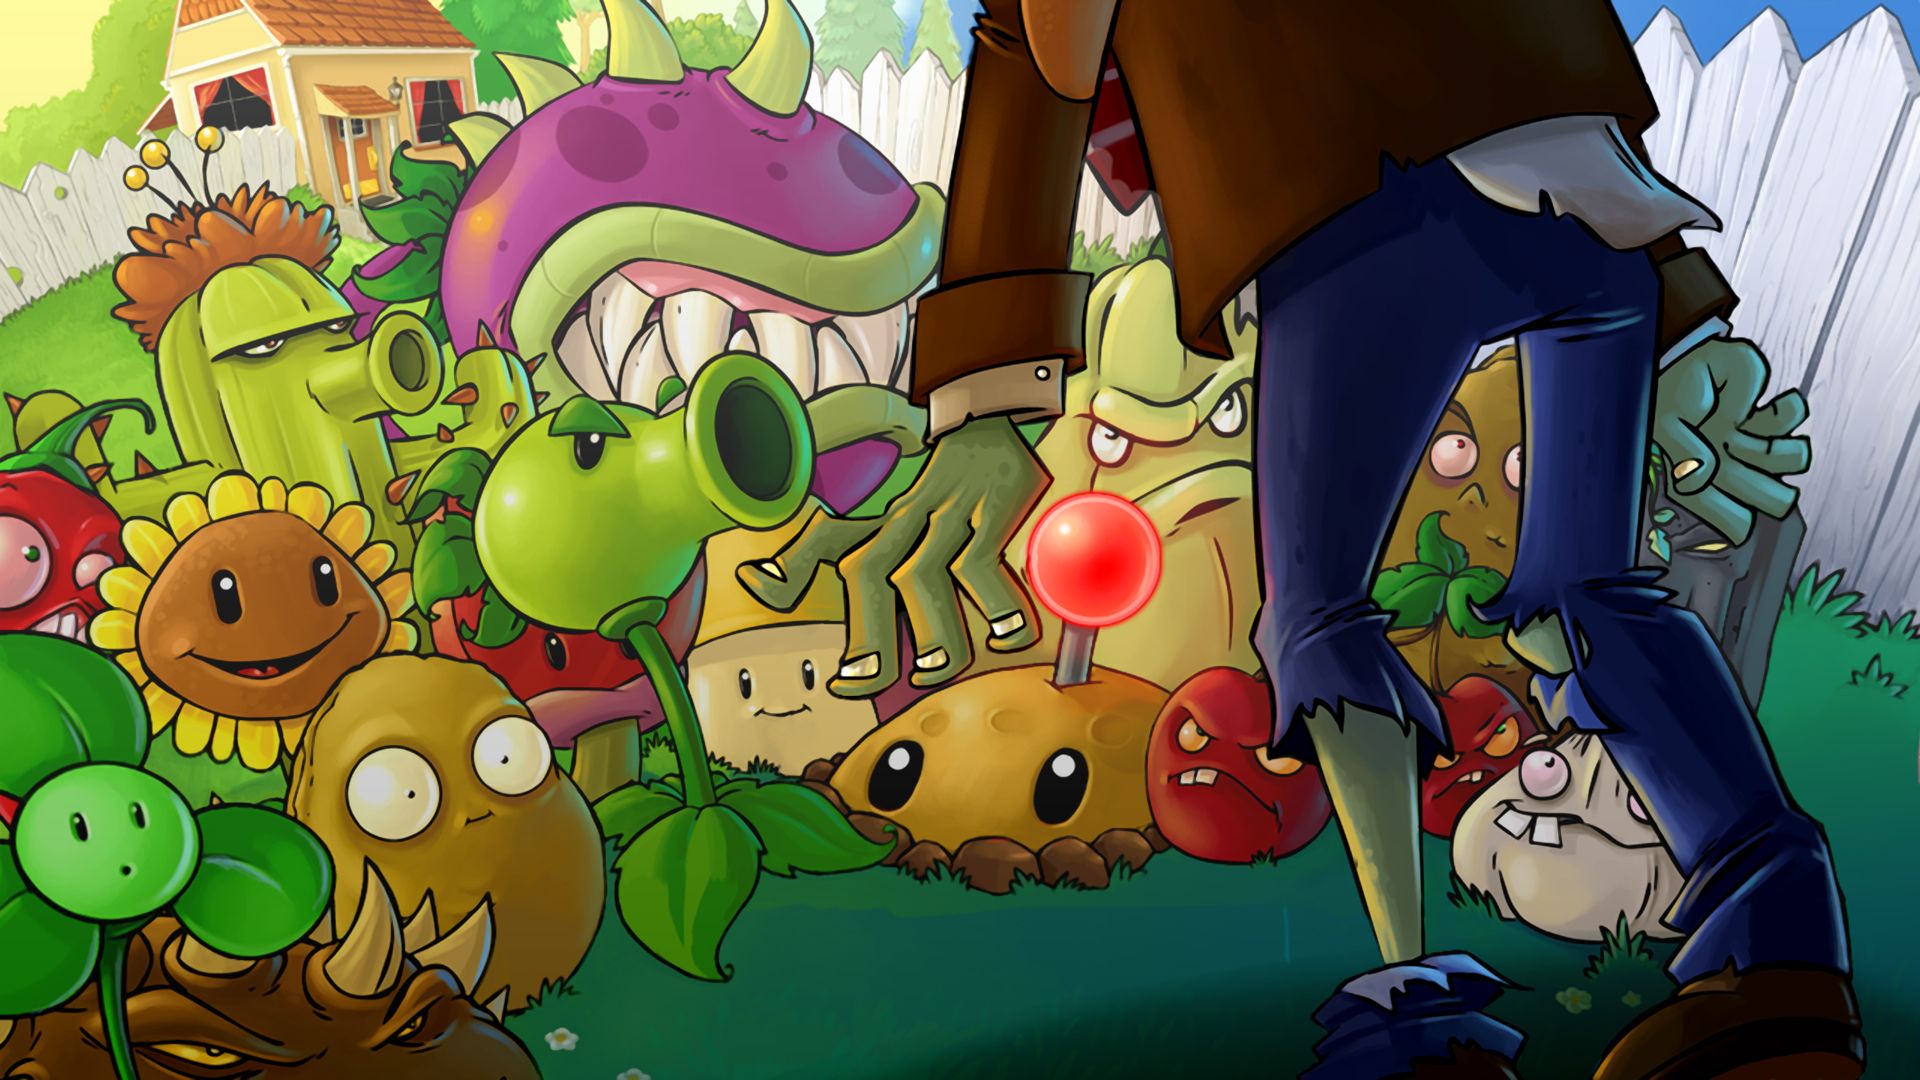 plants-vs-zombies-game-of-the-year-edition_pdp_3840x2160_en_WW.jpg